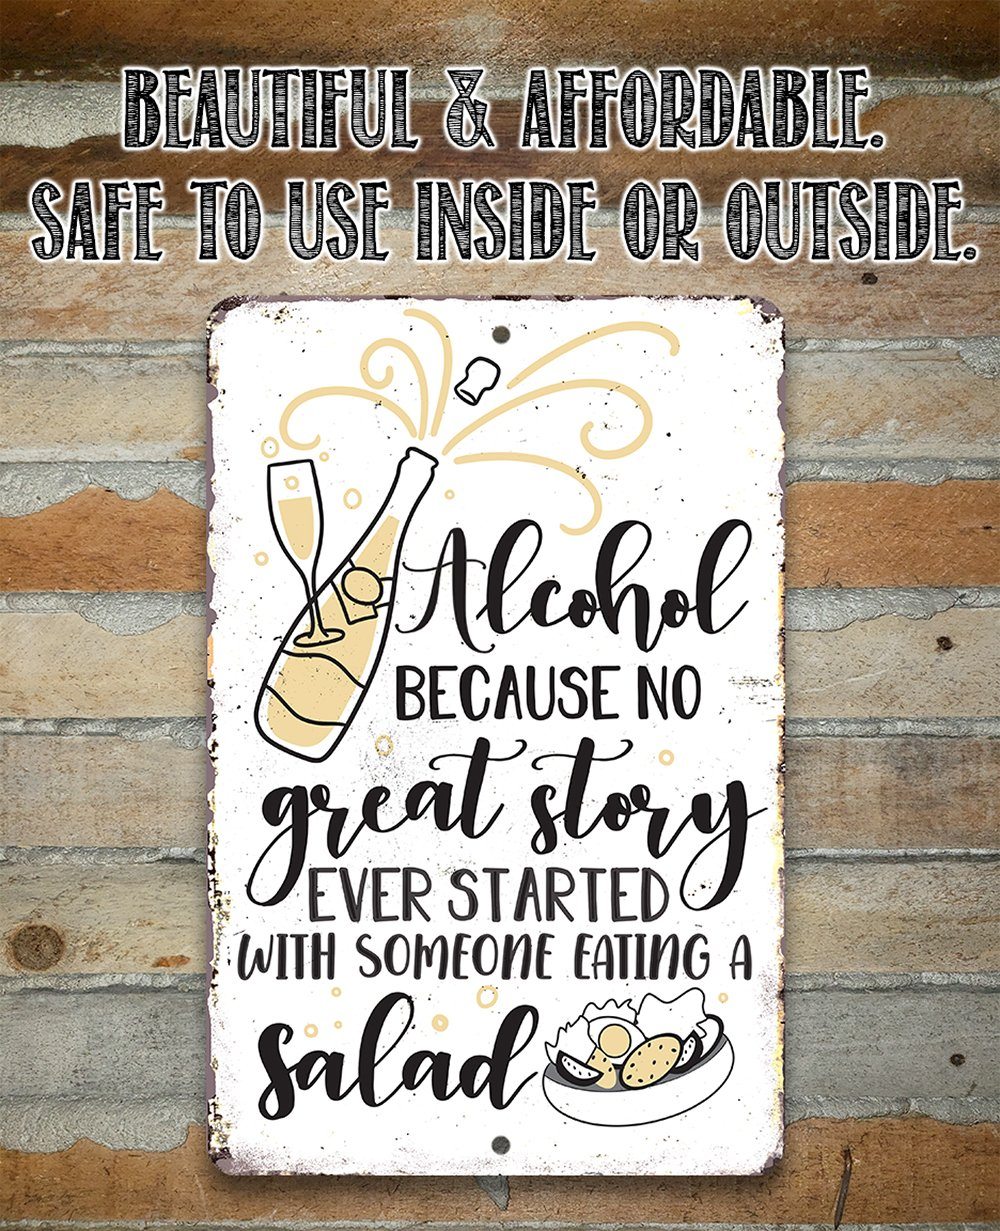 Alcohol No Great Story - Metal Sign | Lone Star Art.